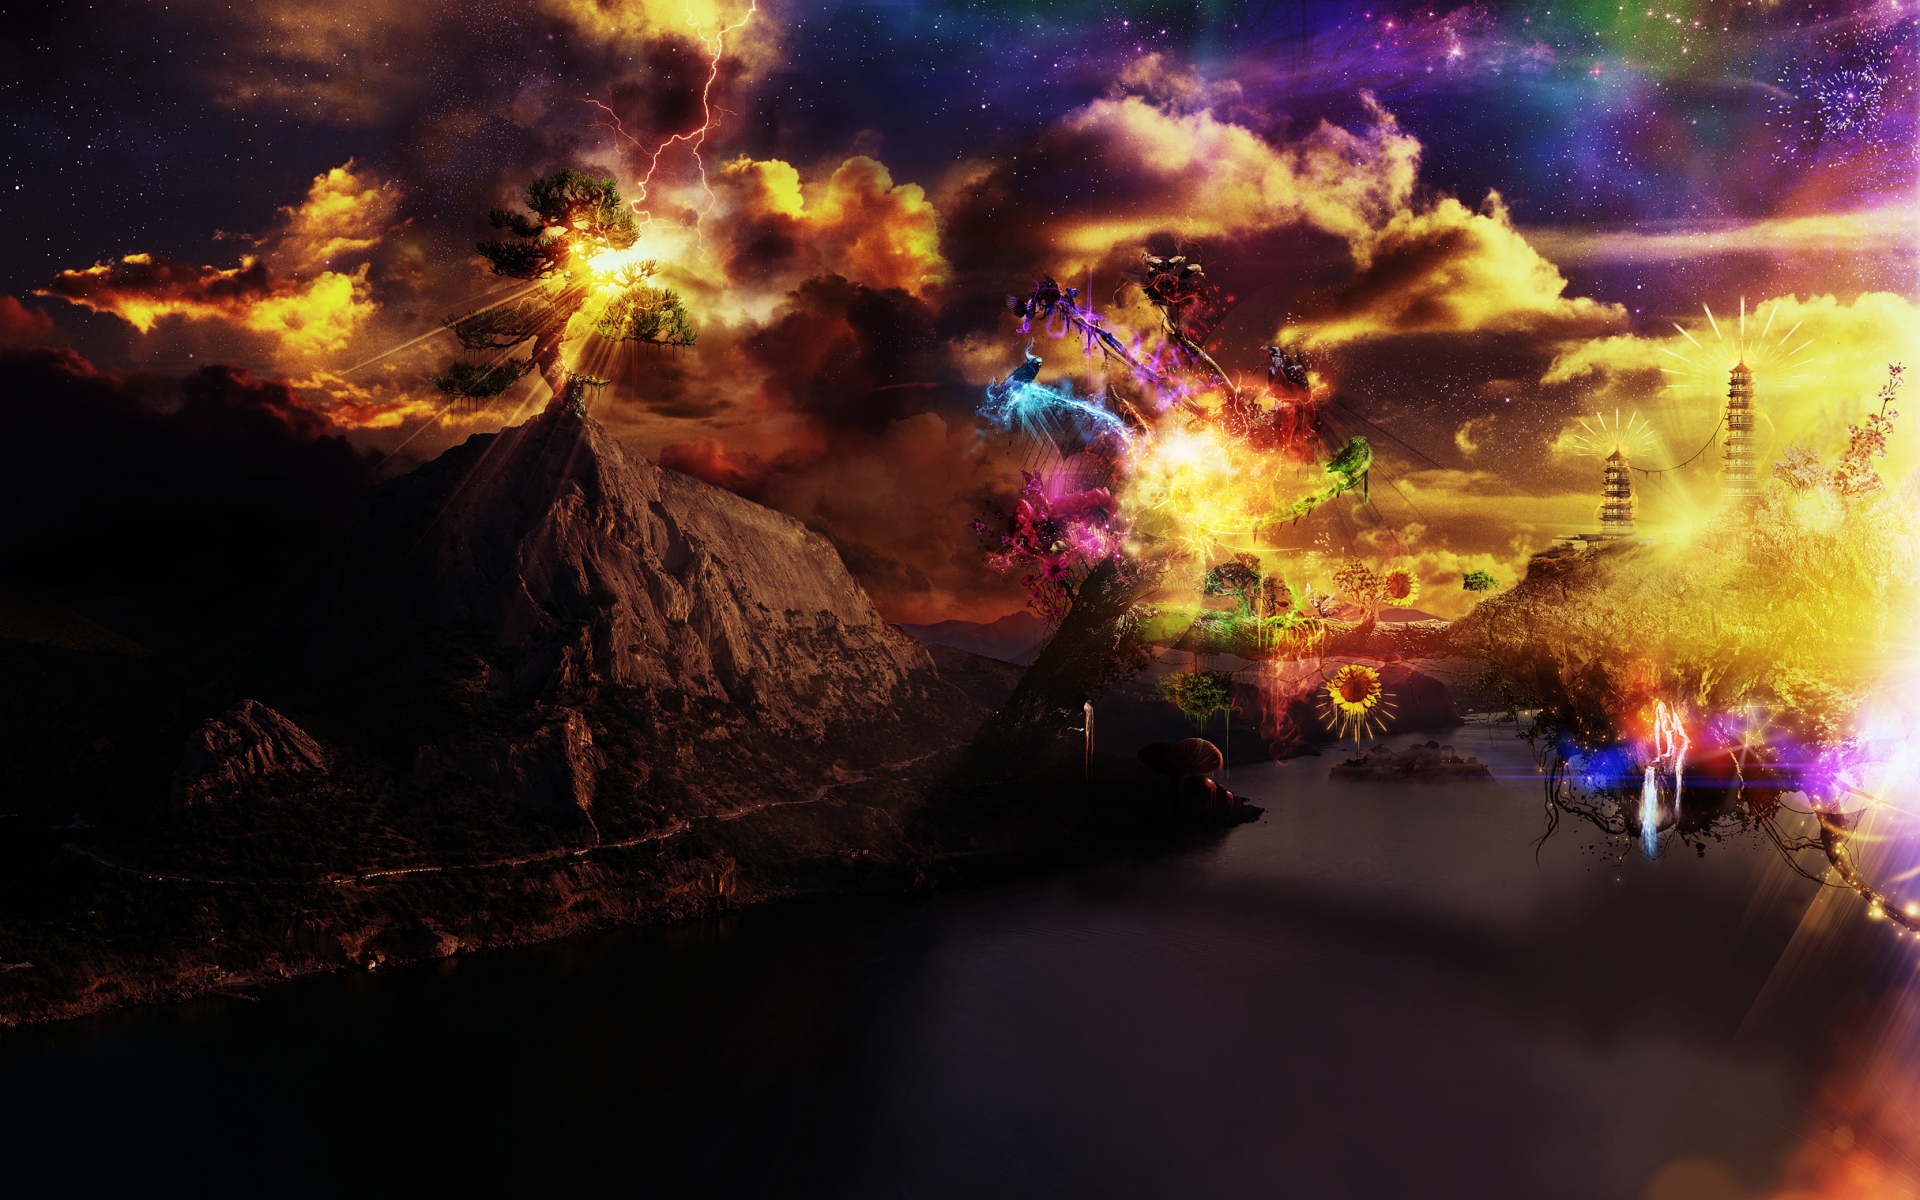 manipulation, Cg, Digital, Art, Artistic, Fantasy, Surreal, Landscapes, Mountains, Lakes, Water, Rivers, Bay, Reflection, Sci, Fi, Science, Fiction, Dream, Sky, Clouds, Color, Psychedelic, Space, Stars, Nebula, S Wallpaper